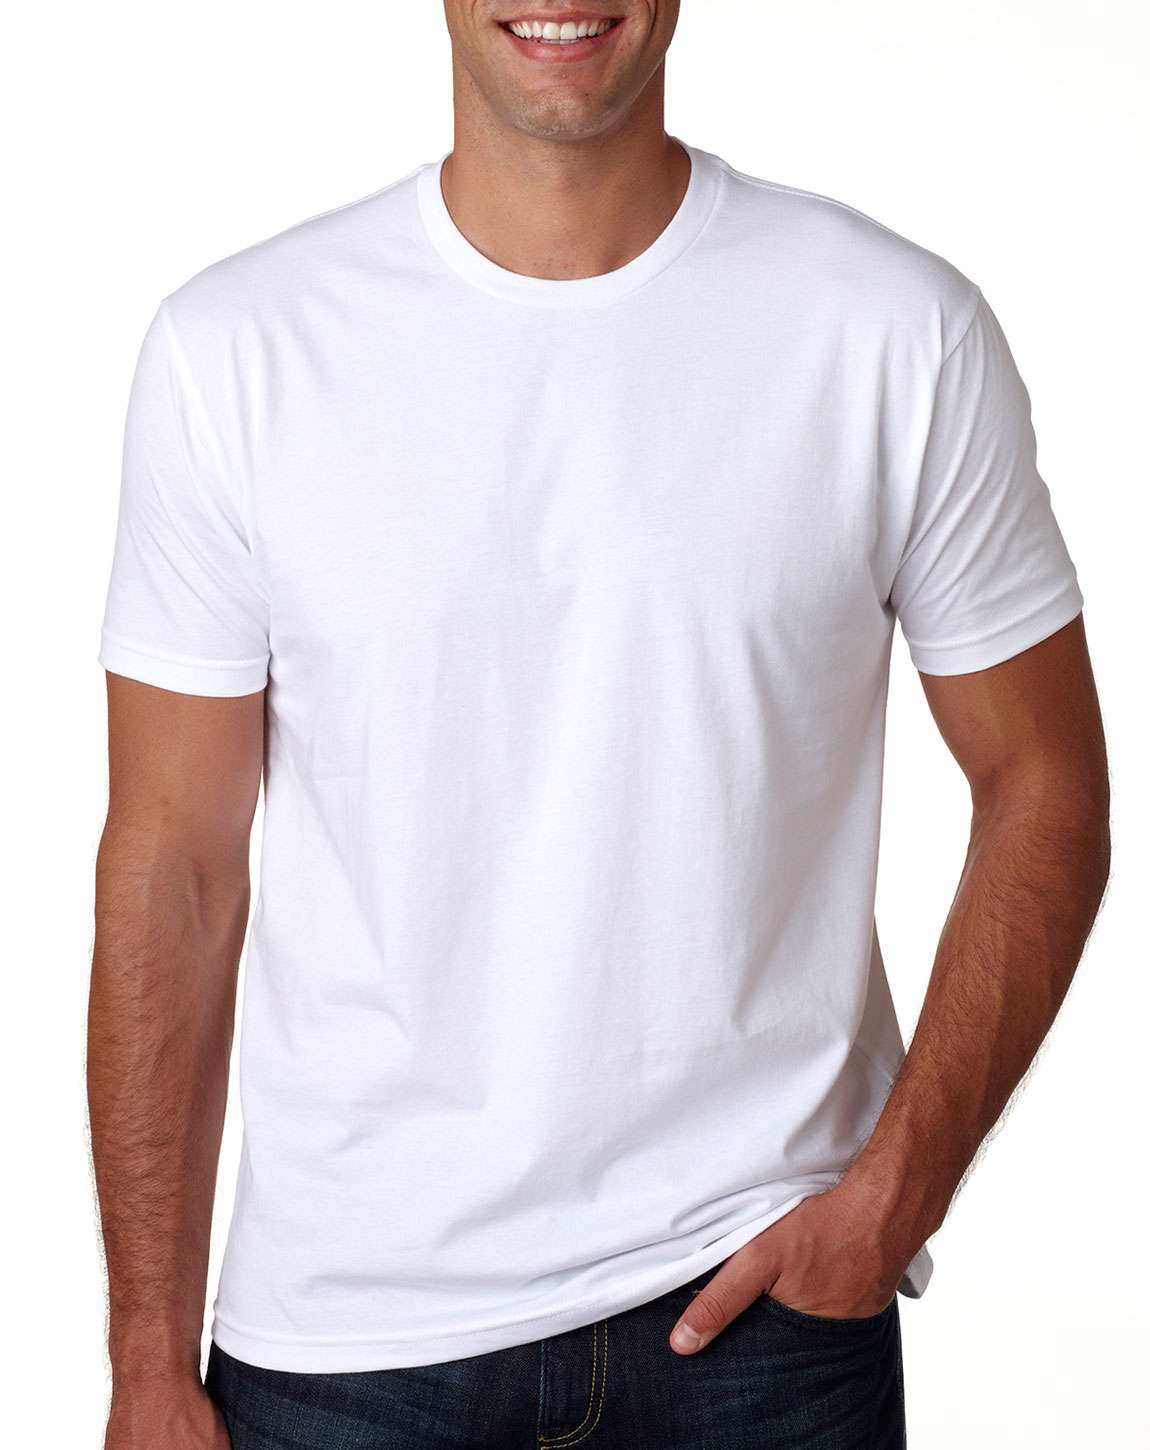 Next Level 3600A Mens Made in USA Cotton Crew